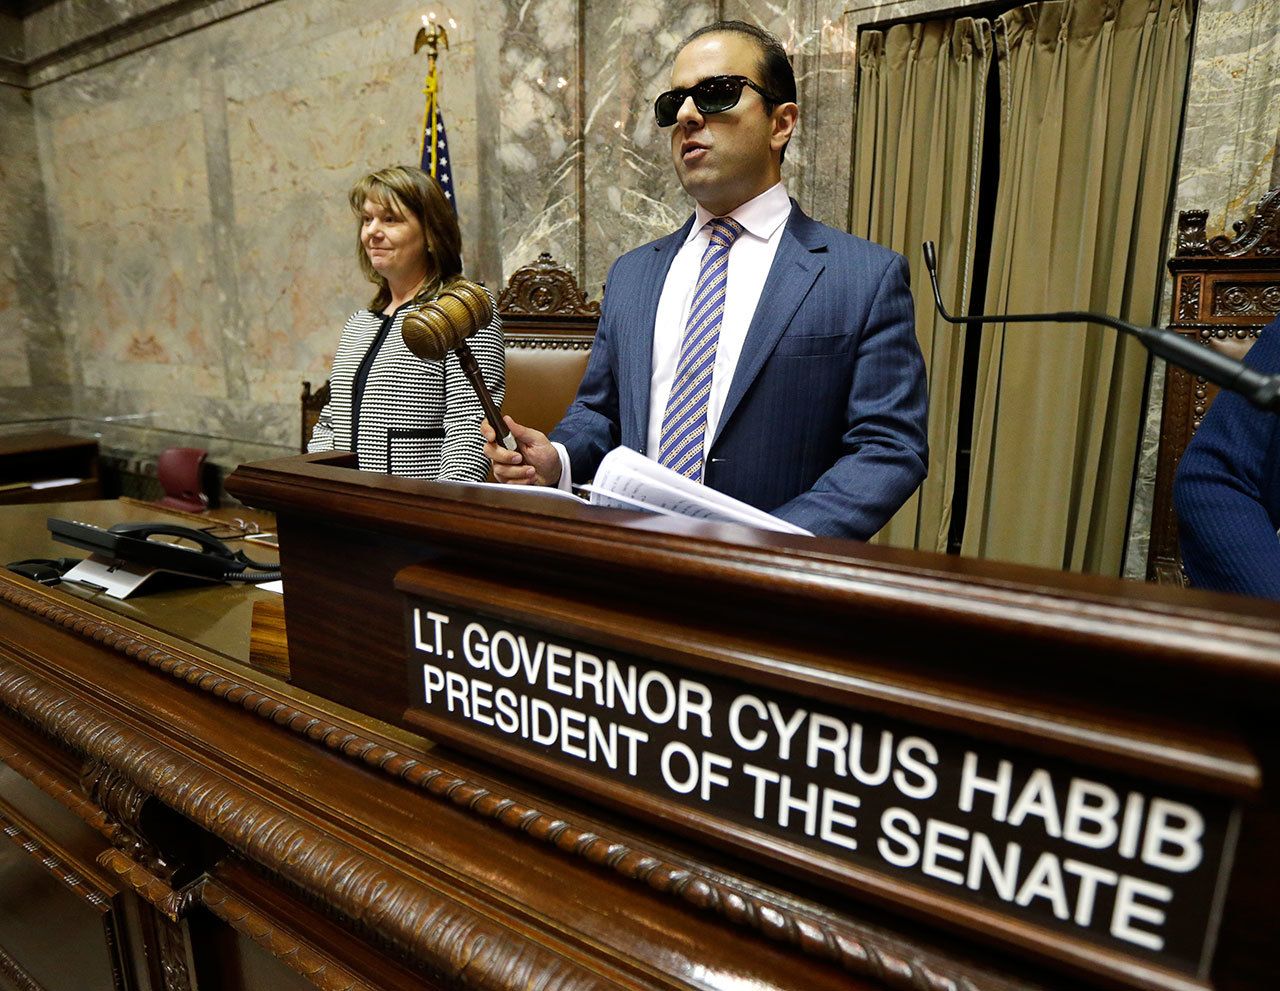 Washington Lt. Gov.-elect Cyrus Habib, right, holds the gavel as he stands at the Senate chamber dais next to Senate Counsel Jeannie Gorrell, left, during a practice session to test technical equipment in Olympia last week. (Ted S. Warren/The Associated Press)